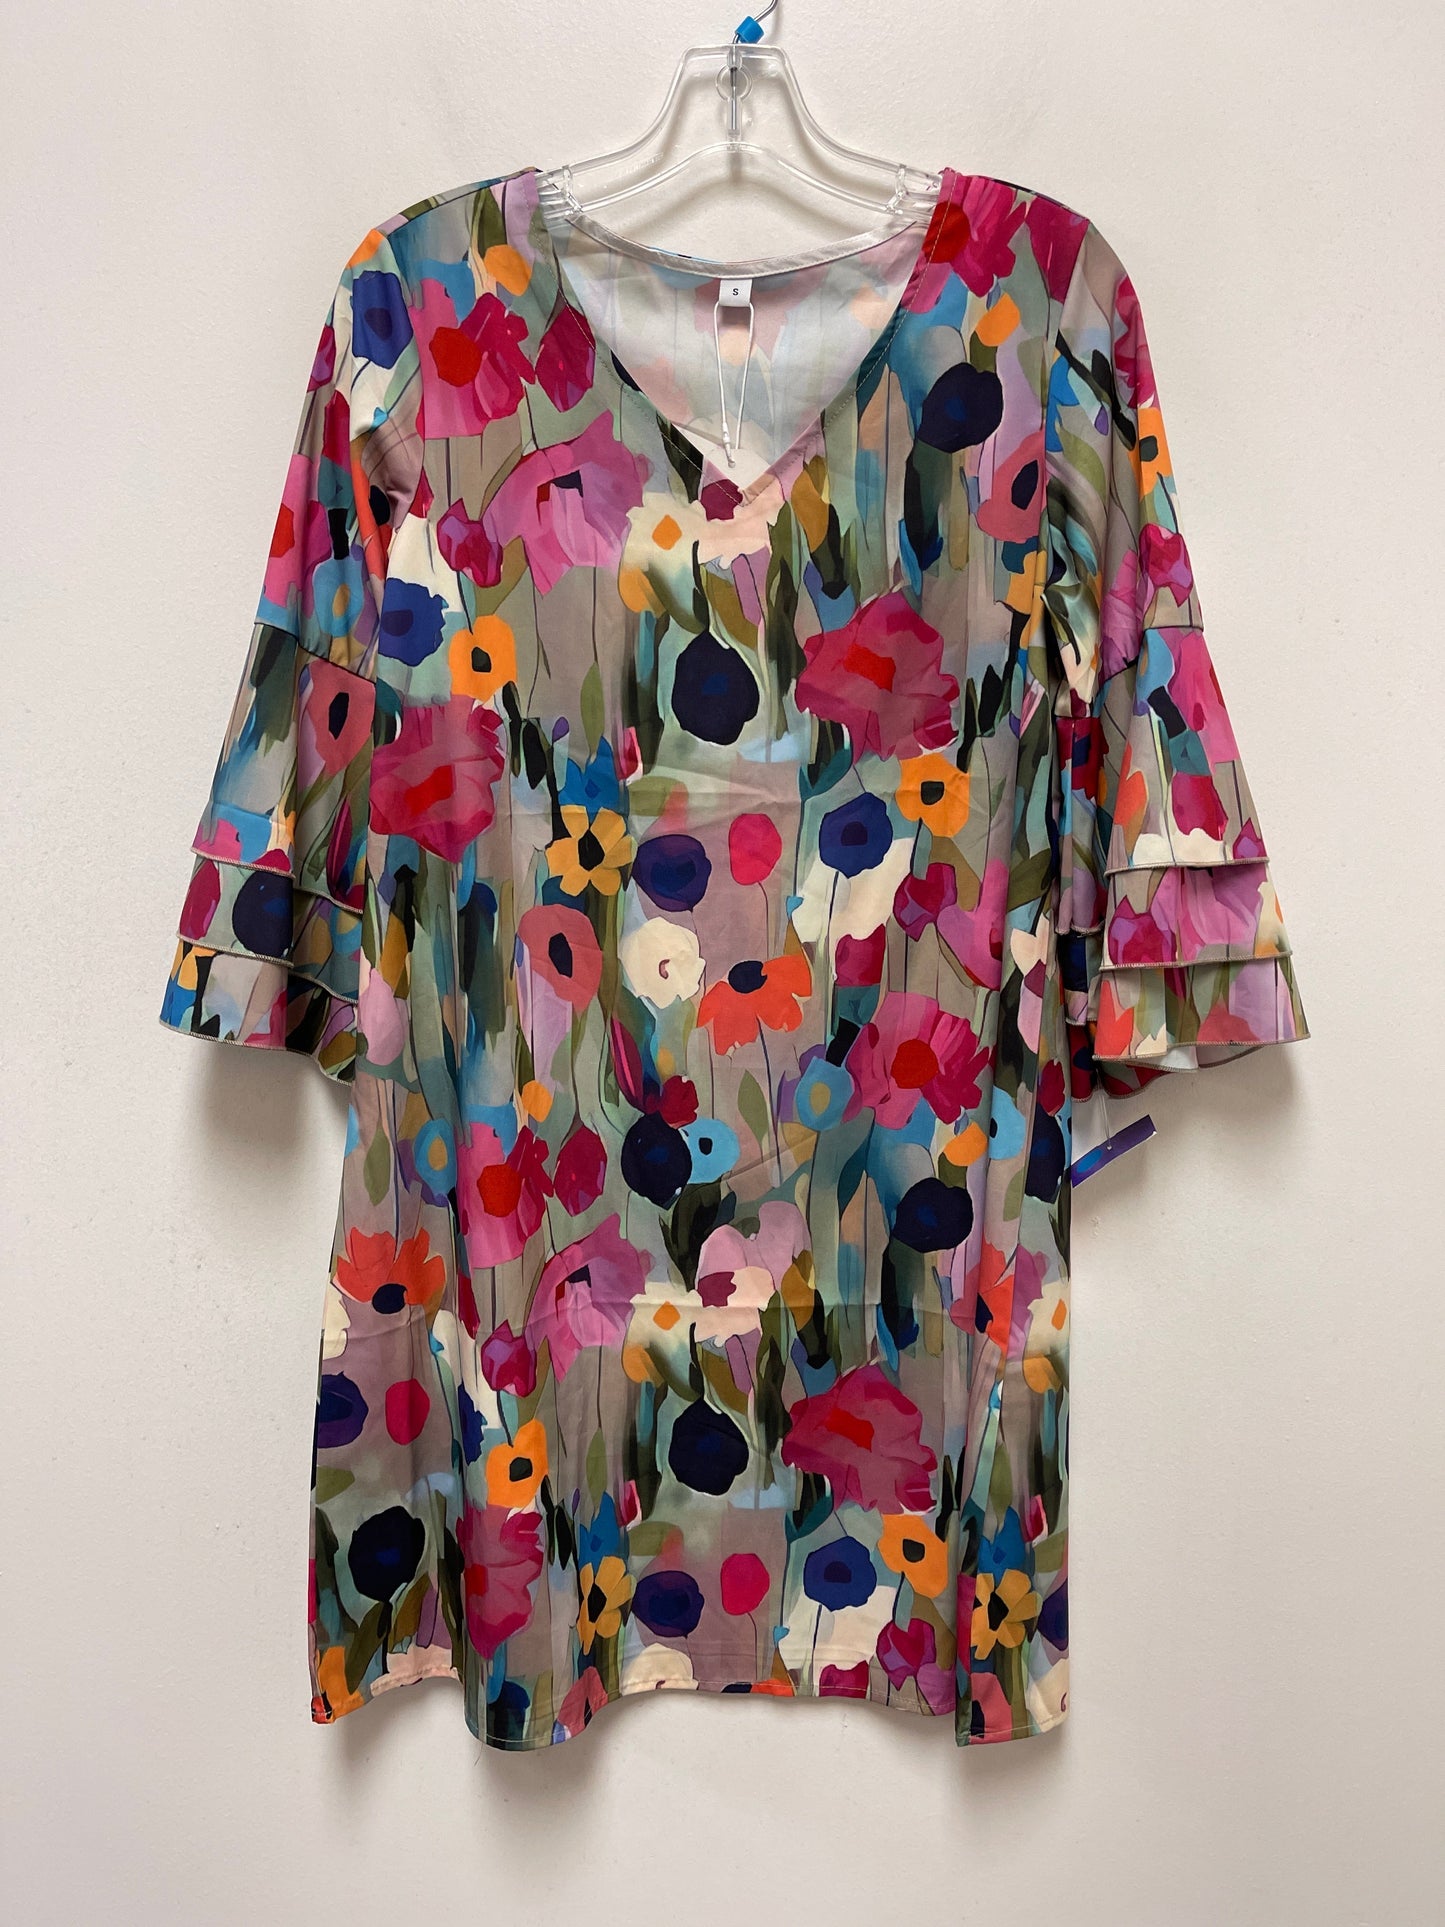 Multi-colored Top Long Sleeve Clothes Mentor, Size S